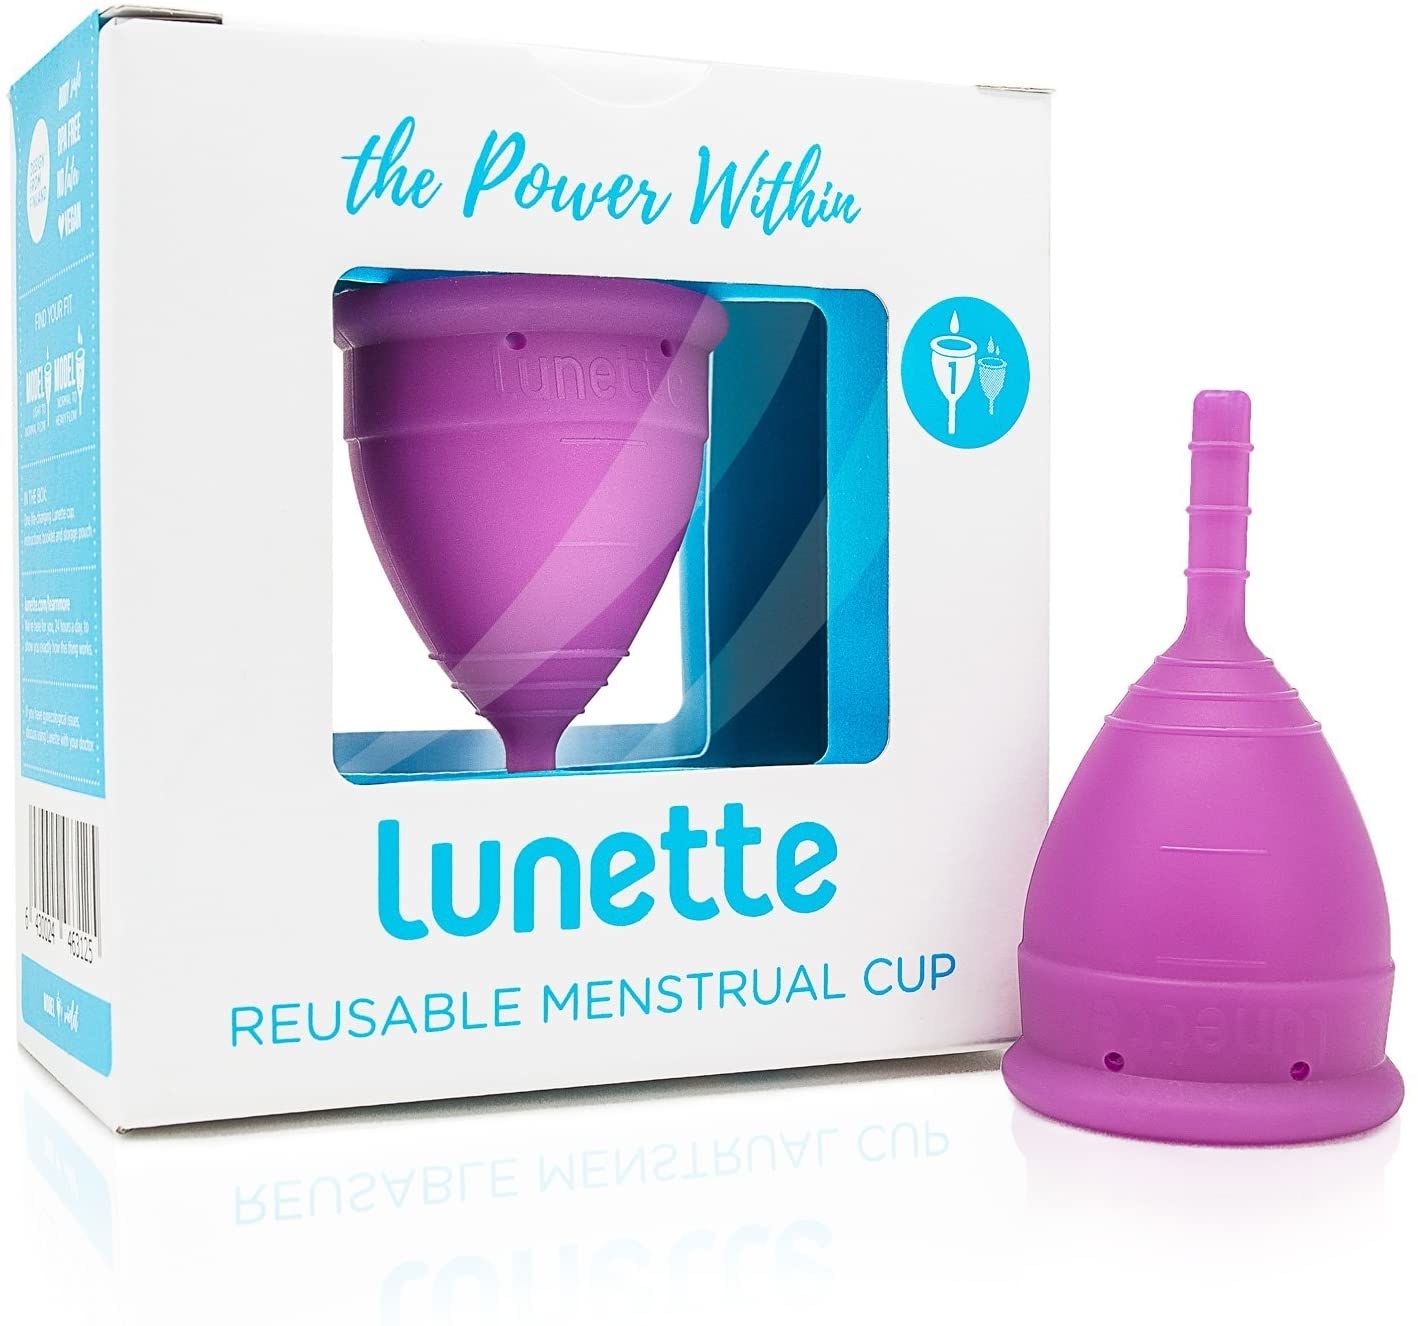 Menstrual cups are a safe, environmentally friendly option for people with  periods, study says